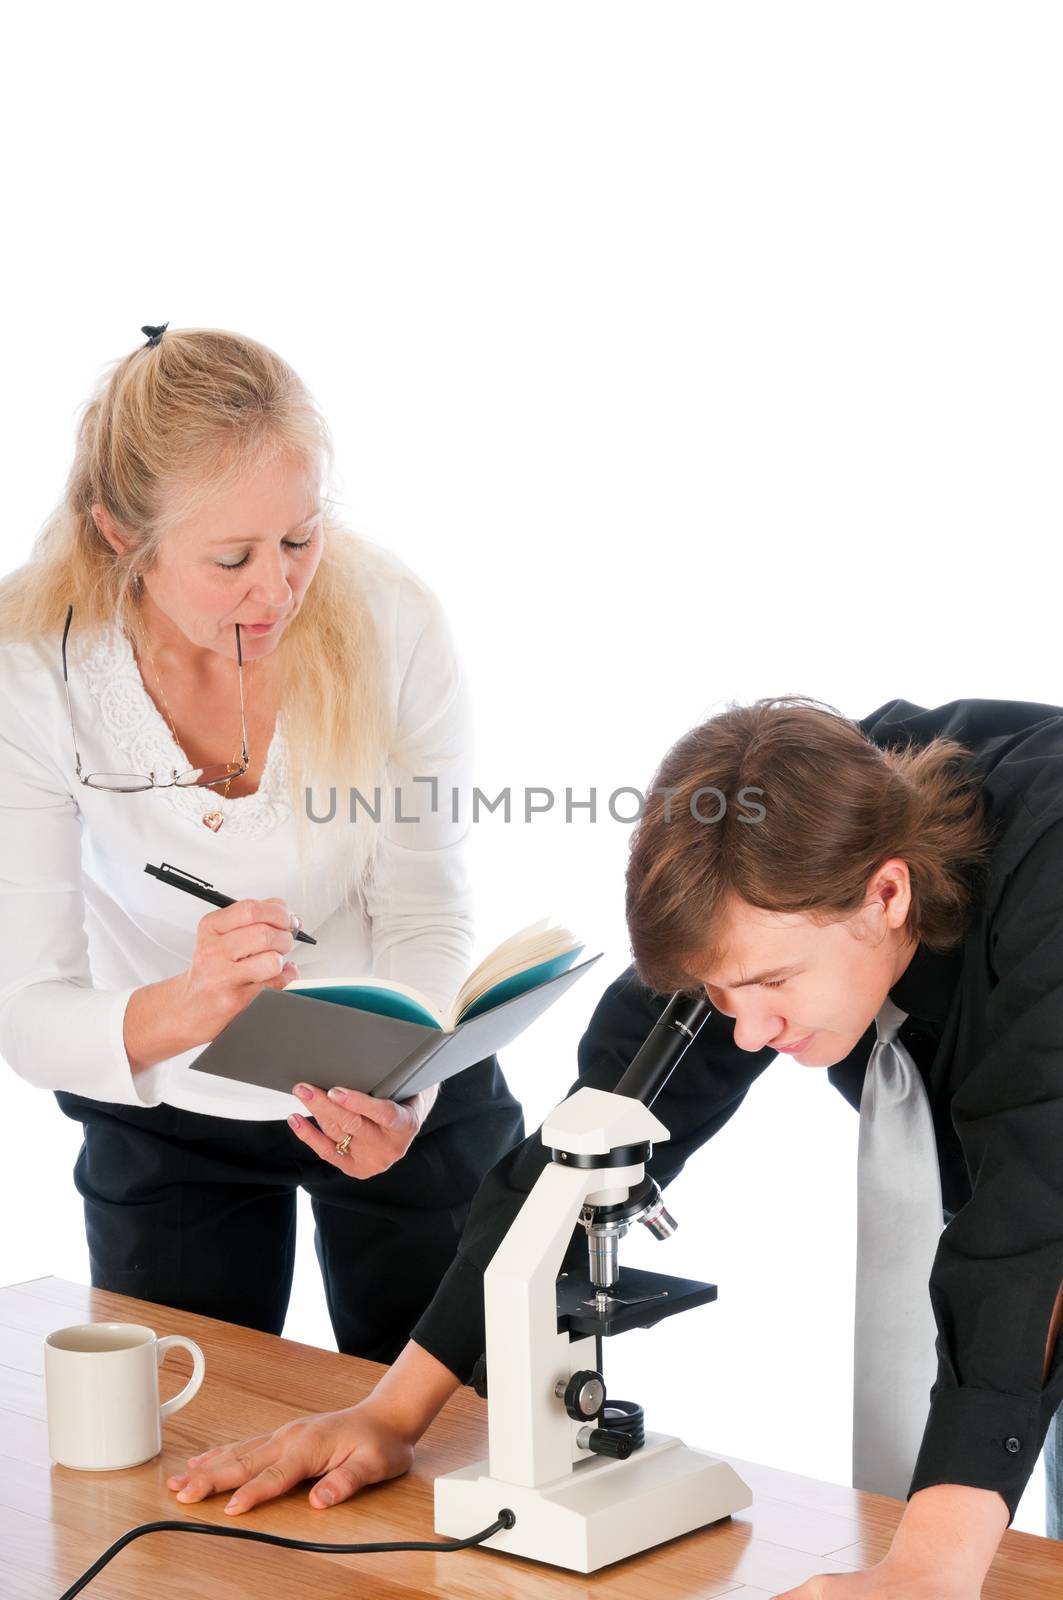 Female professor teaching a male student in a biology class, using a microscope. Isolated on a white background.